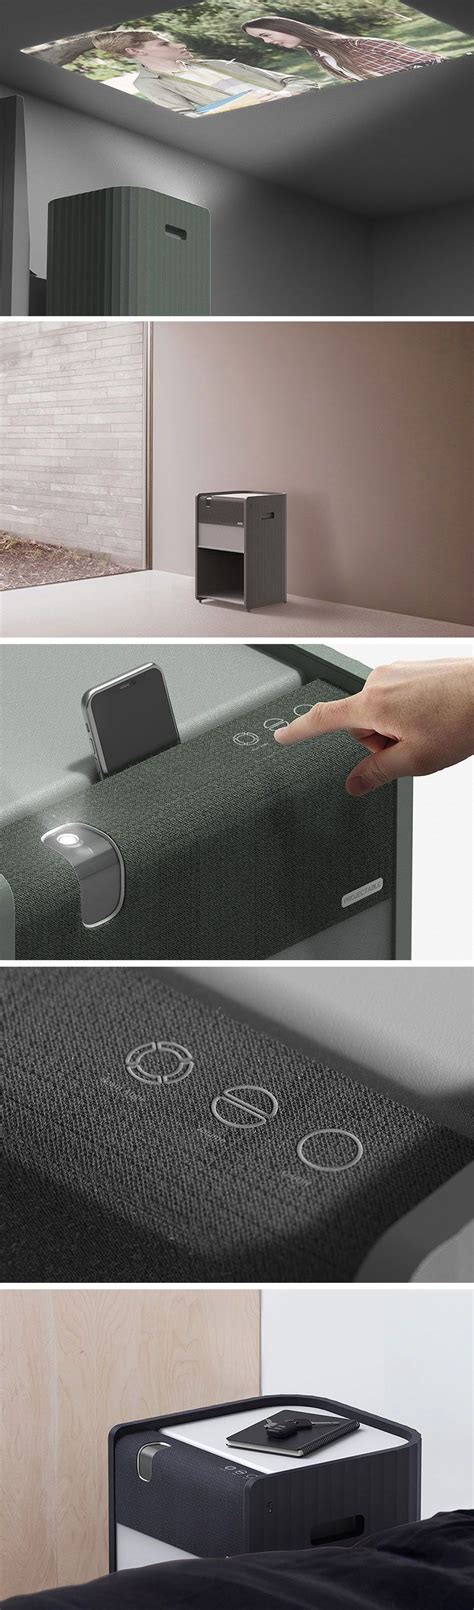 A Side Table And A Projector Merge To Keep You Entertained And Your